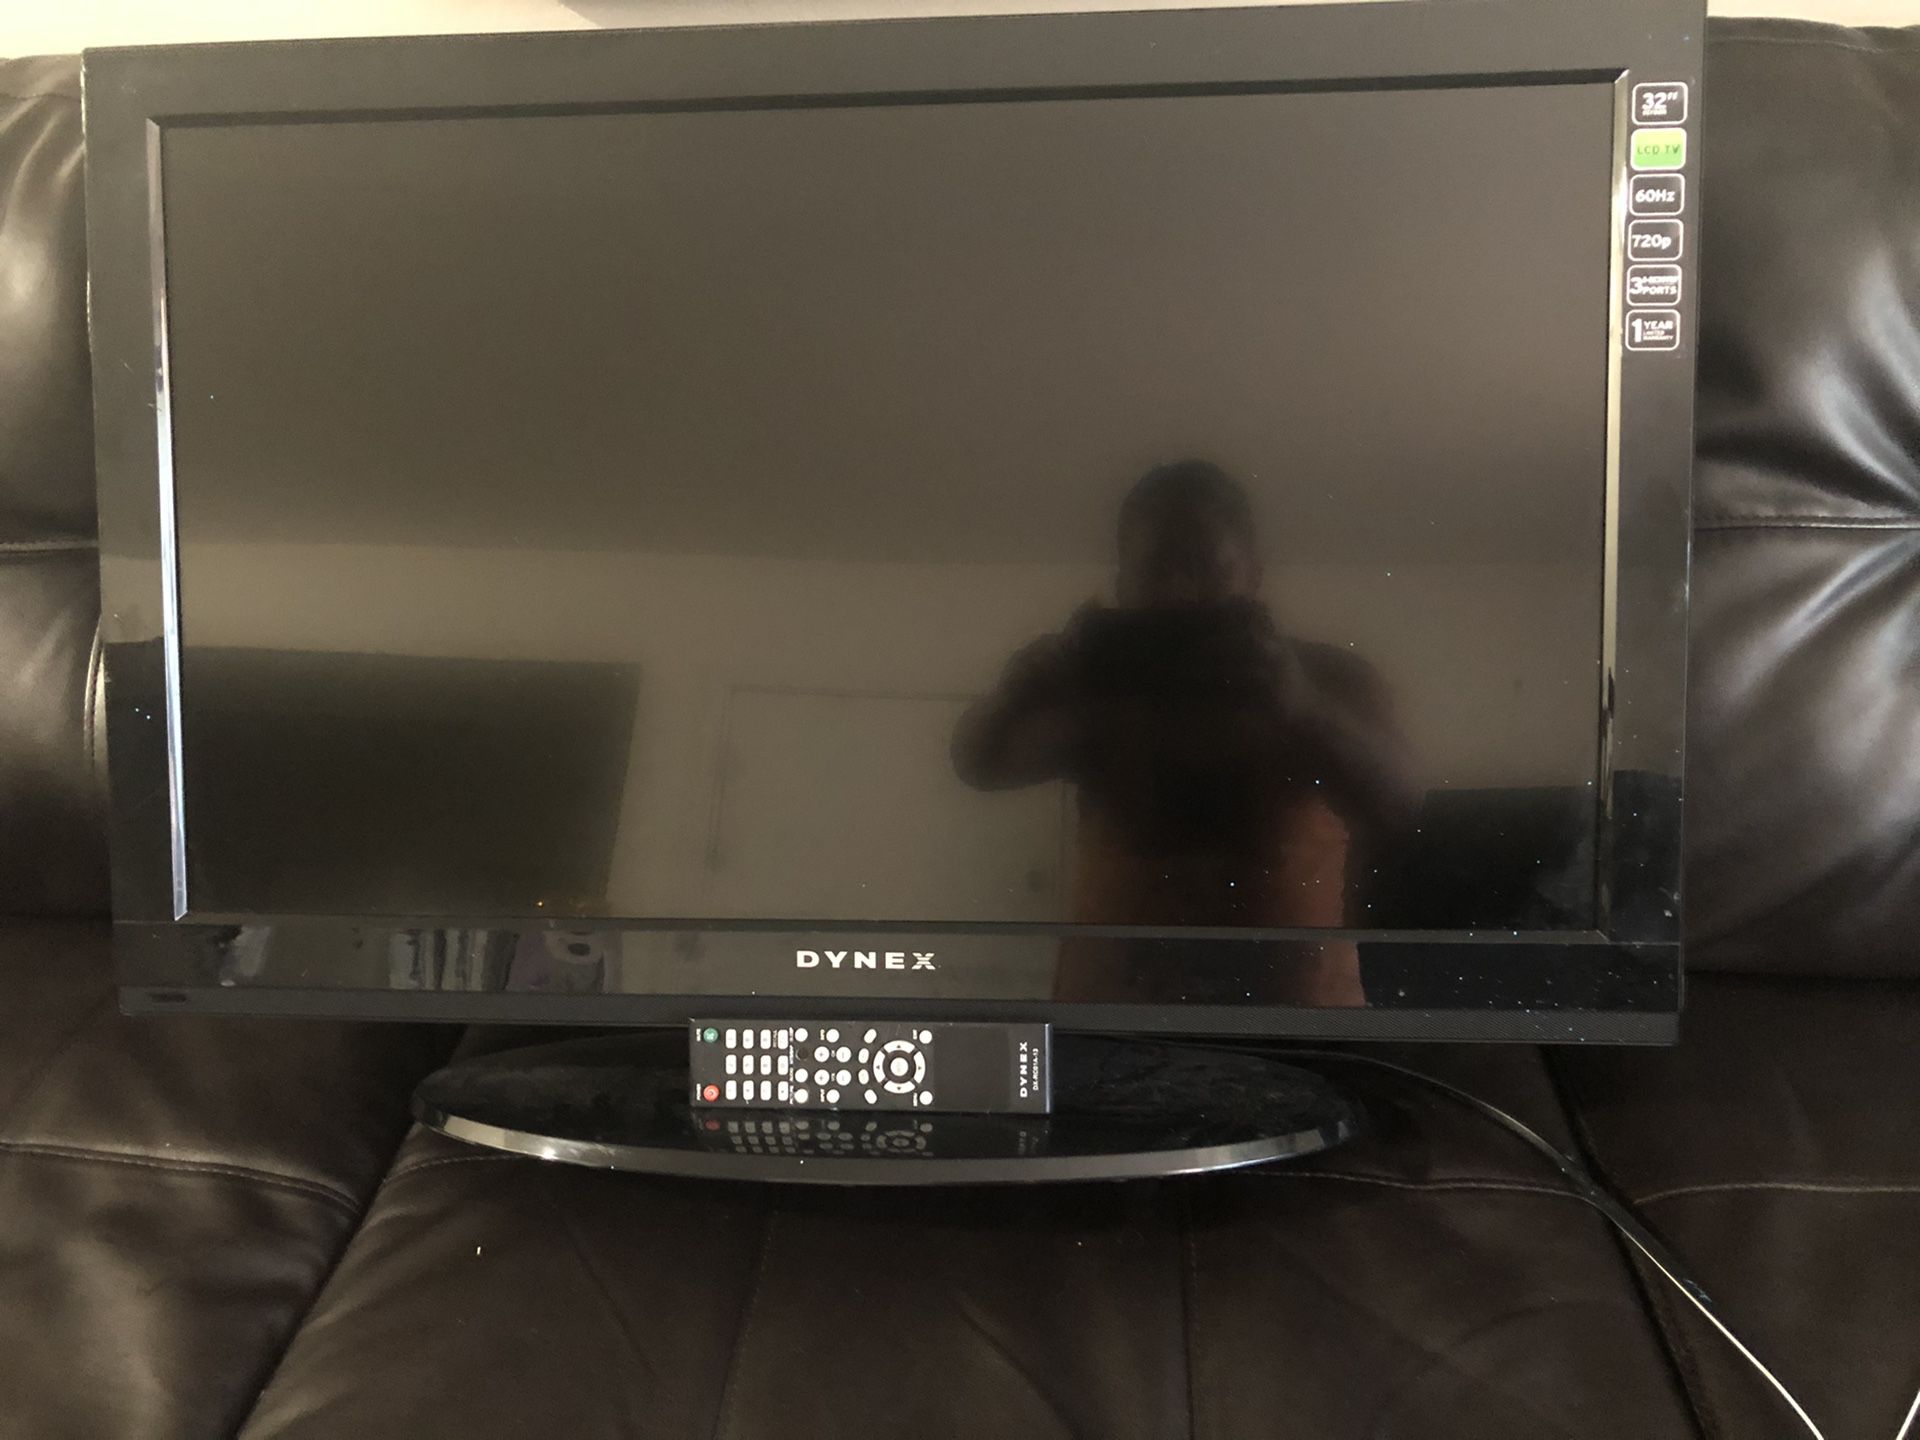 32’ not a smart tv good condition just upgraded to a new one